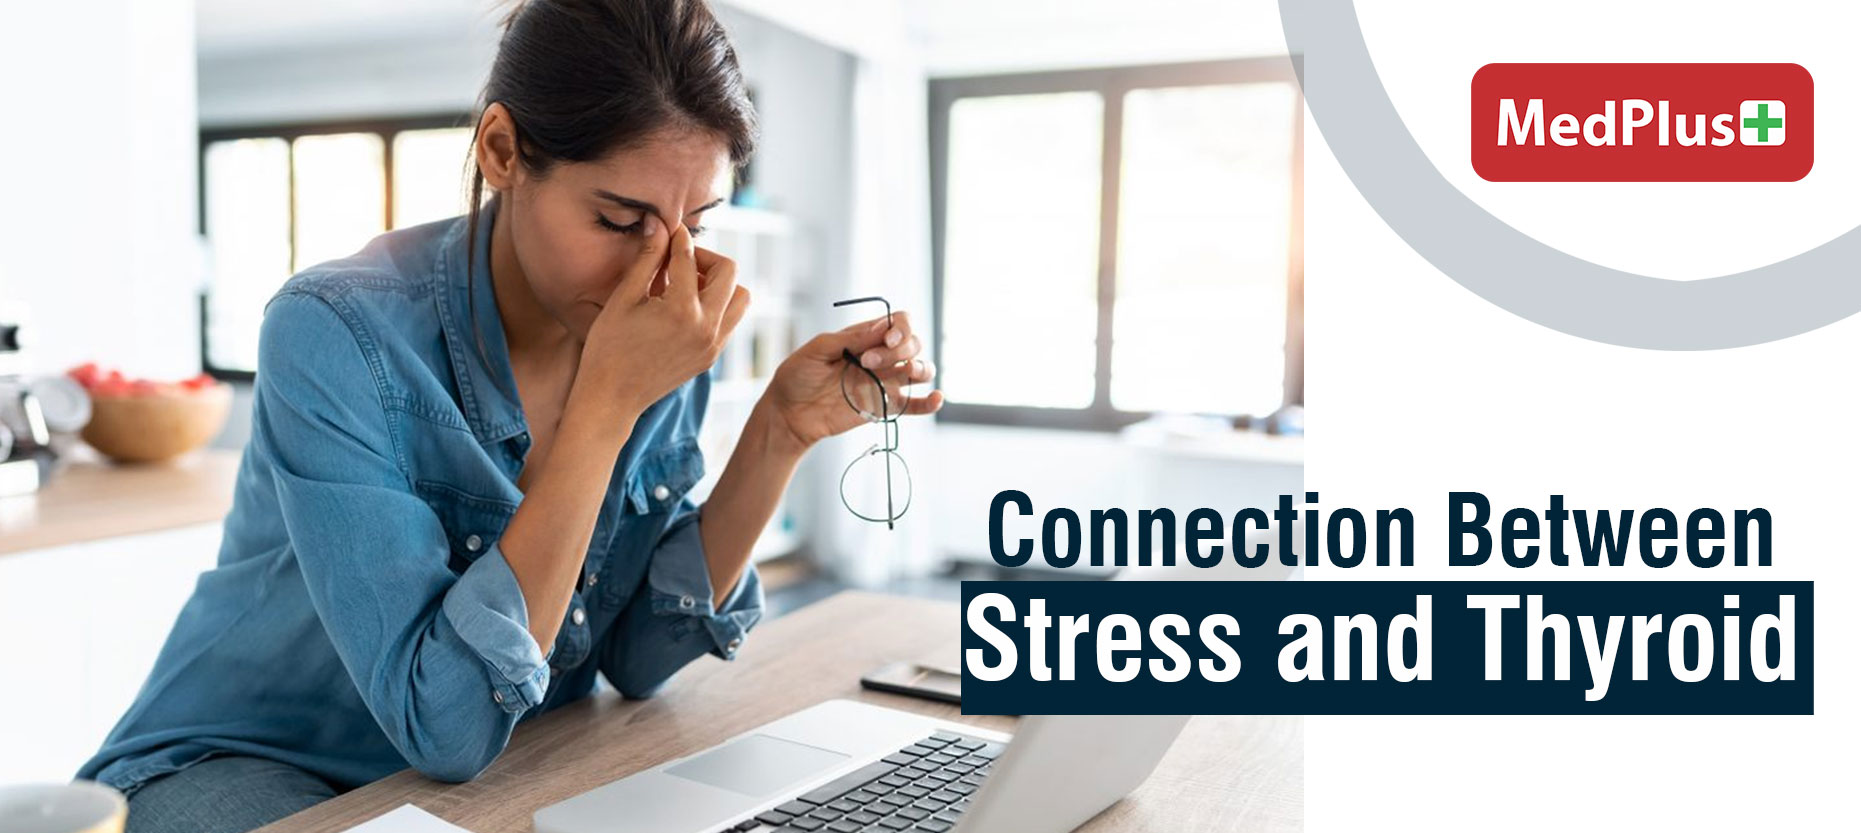 Connection Between Stress and Thyroid